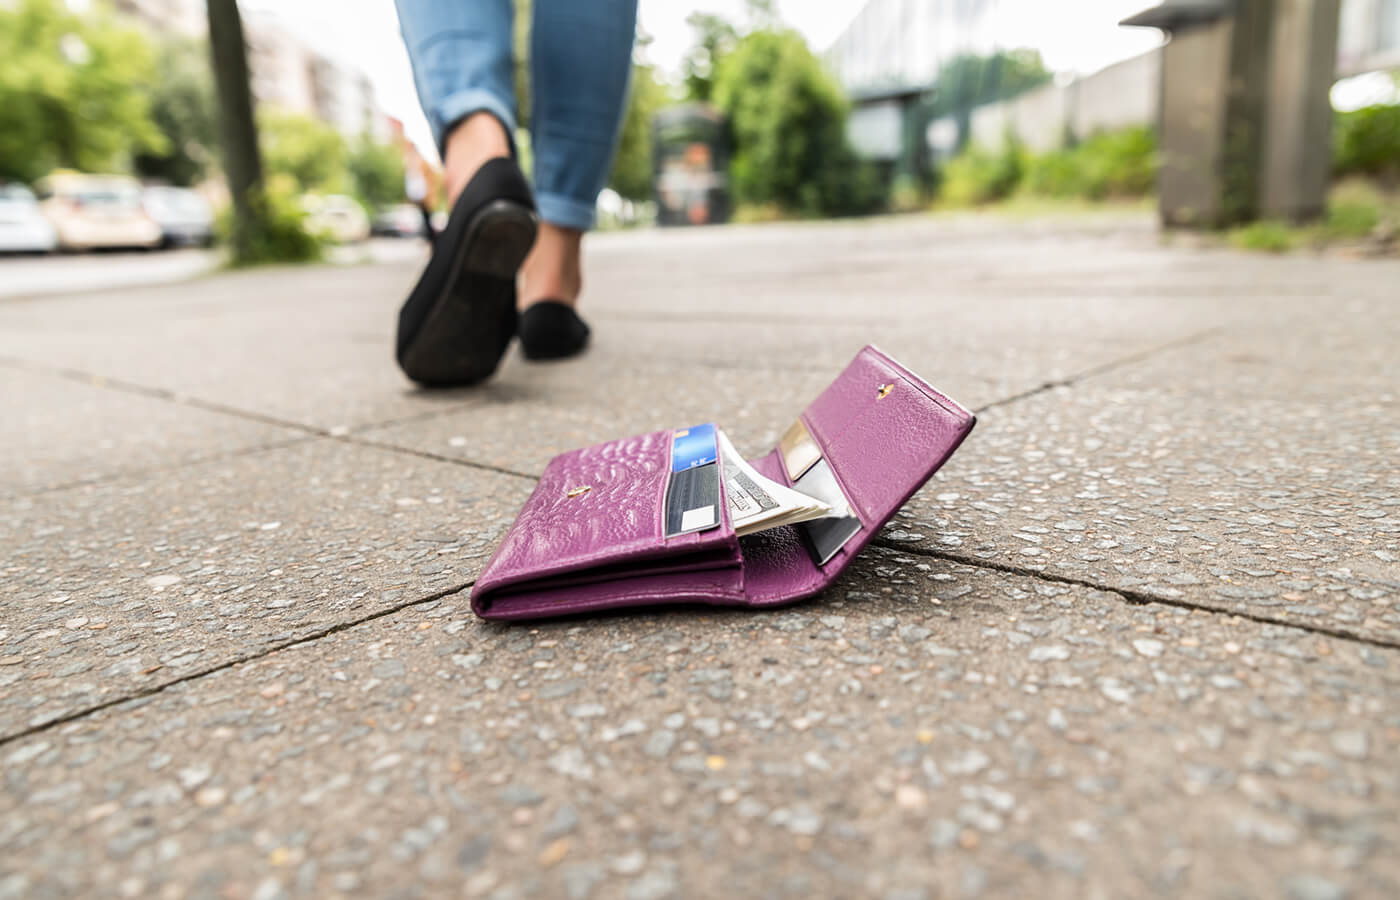 A person lost their wallet on the sidewalk.